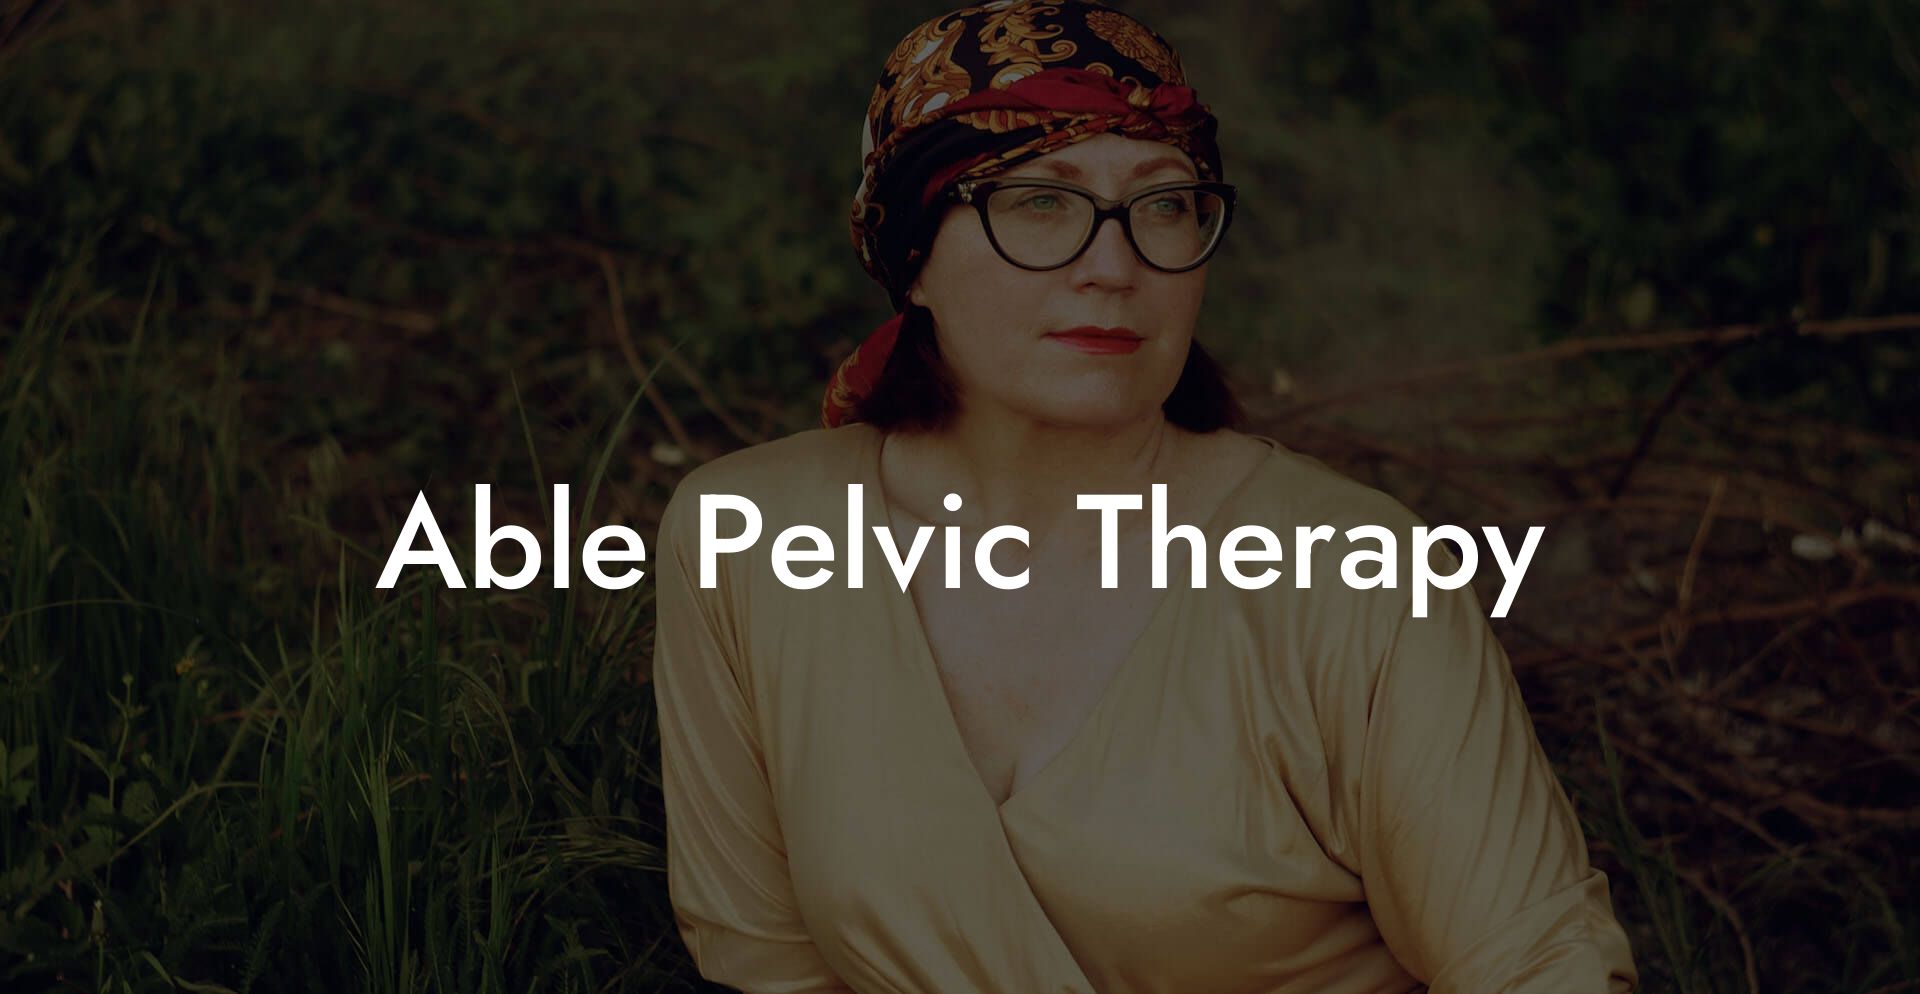 Able Pelvic Therapy